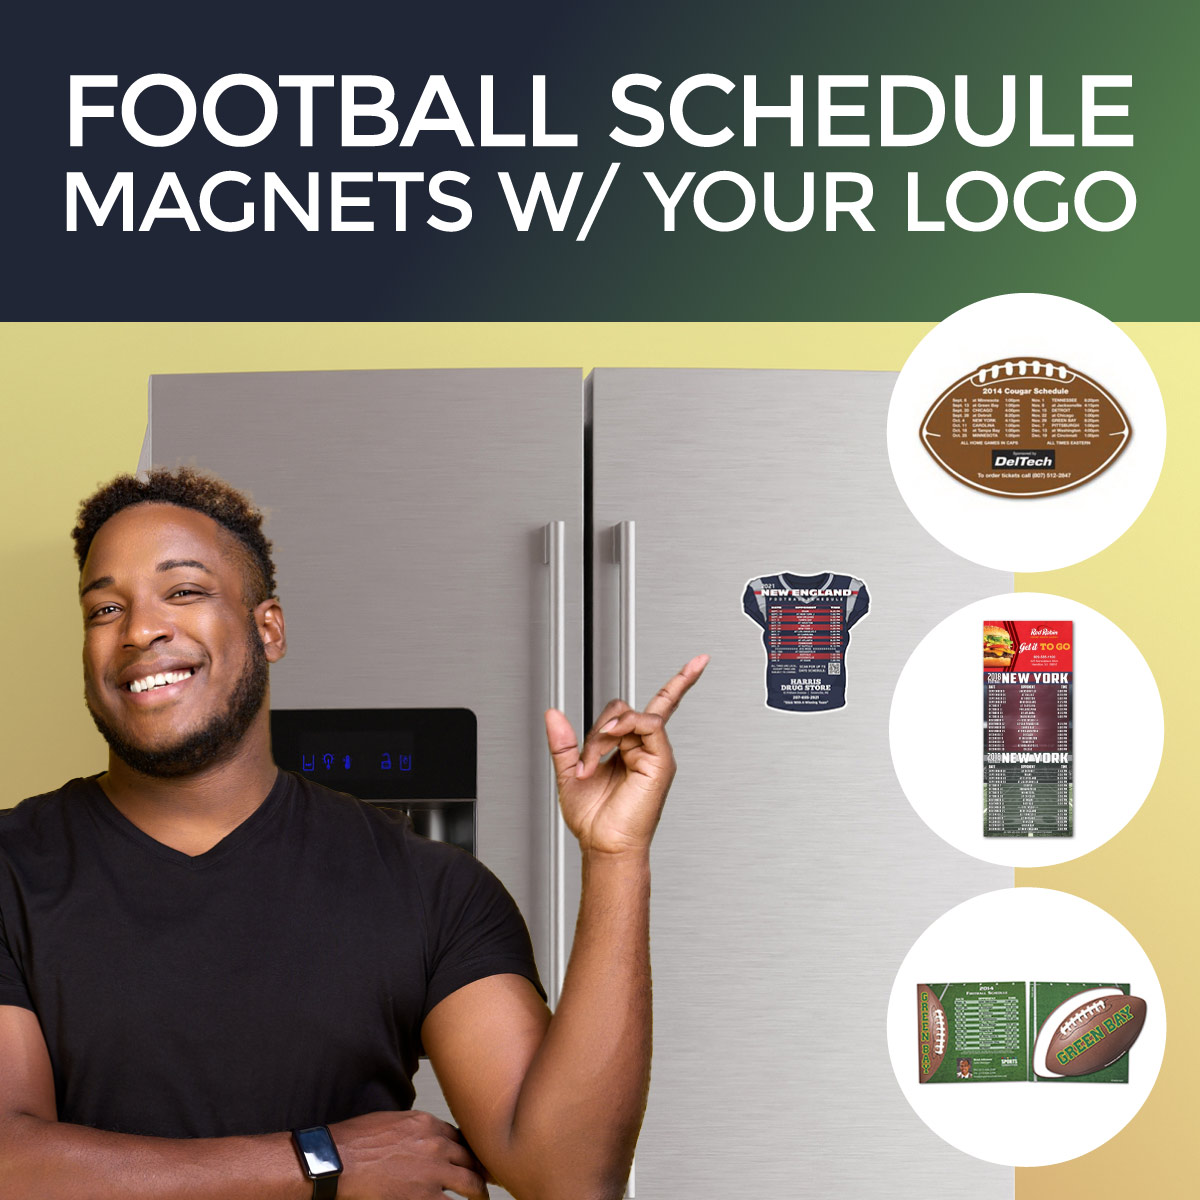 Market your business with custom Football Schedule Magnets